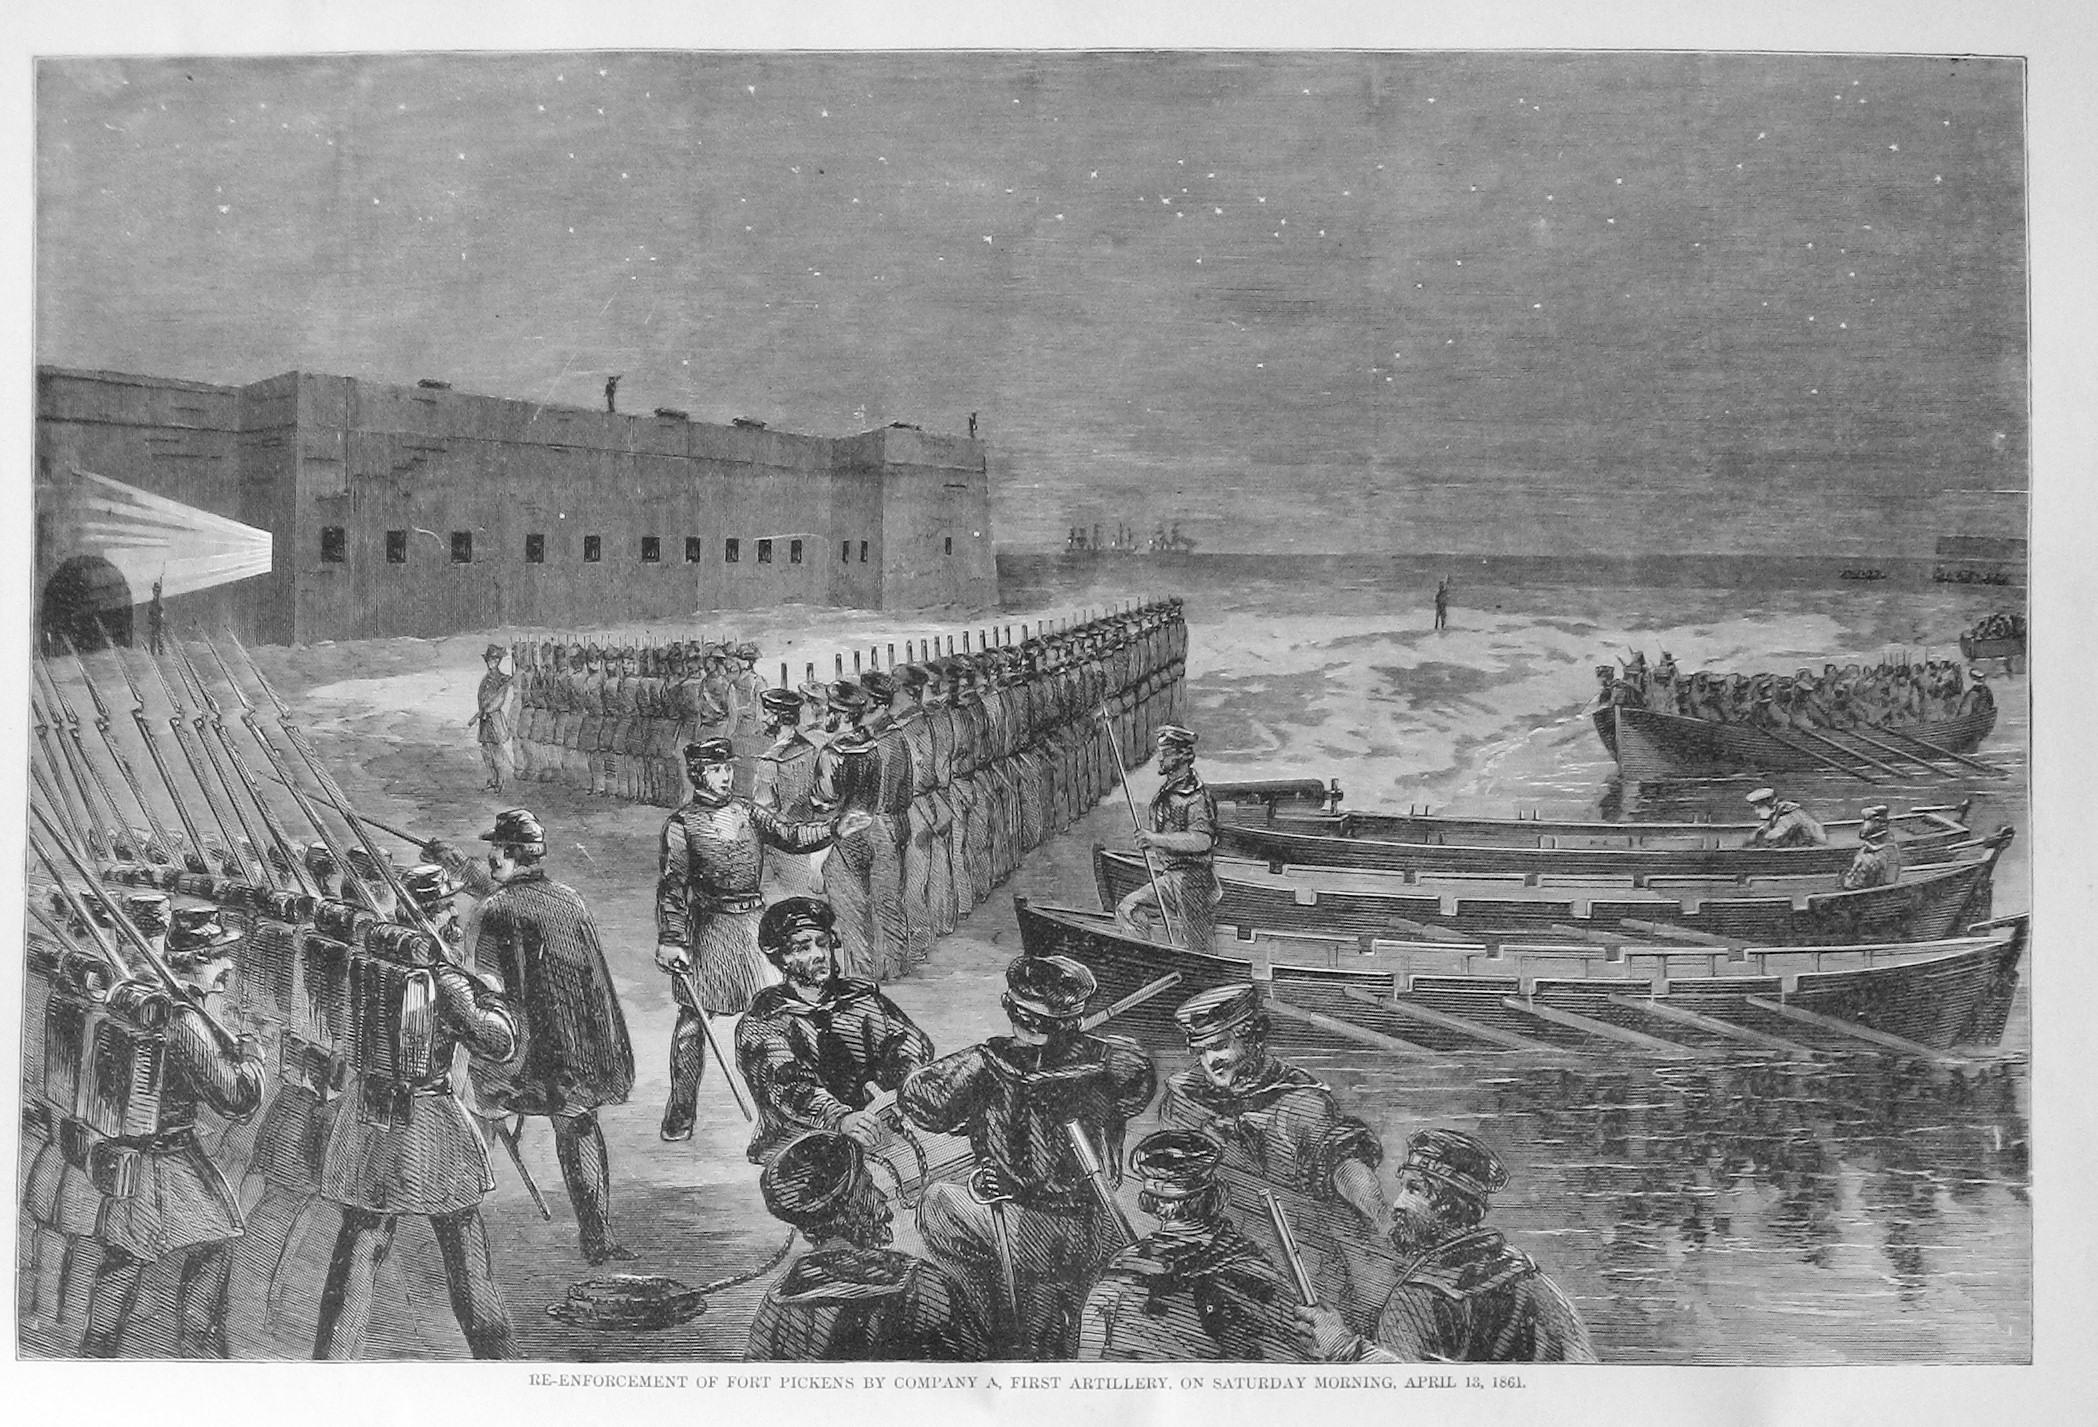 fort pickens company a first artillery april 13 1861